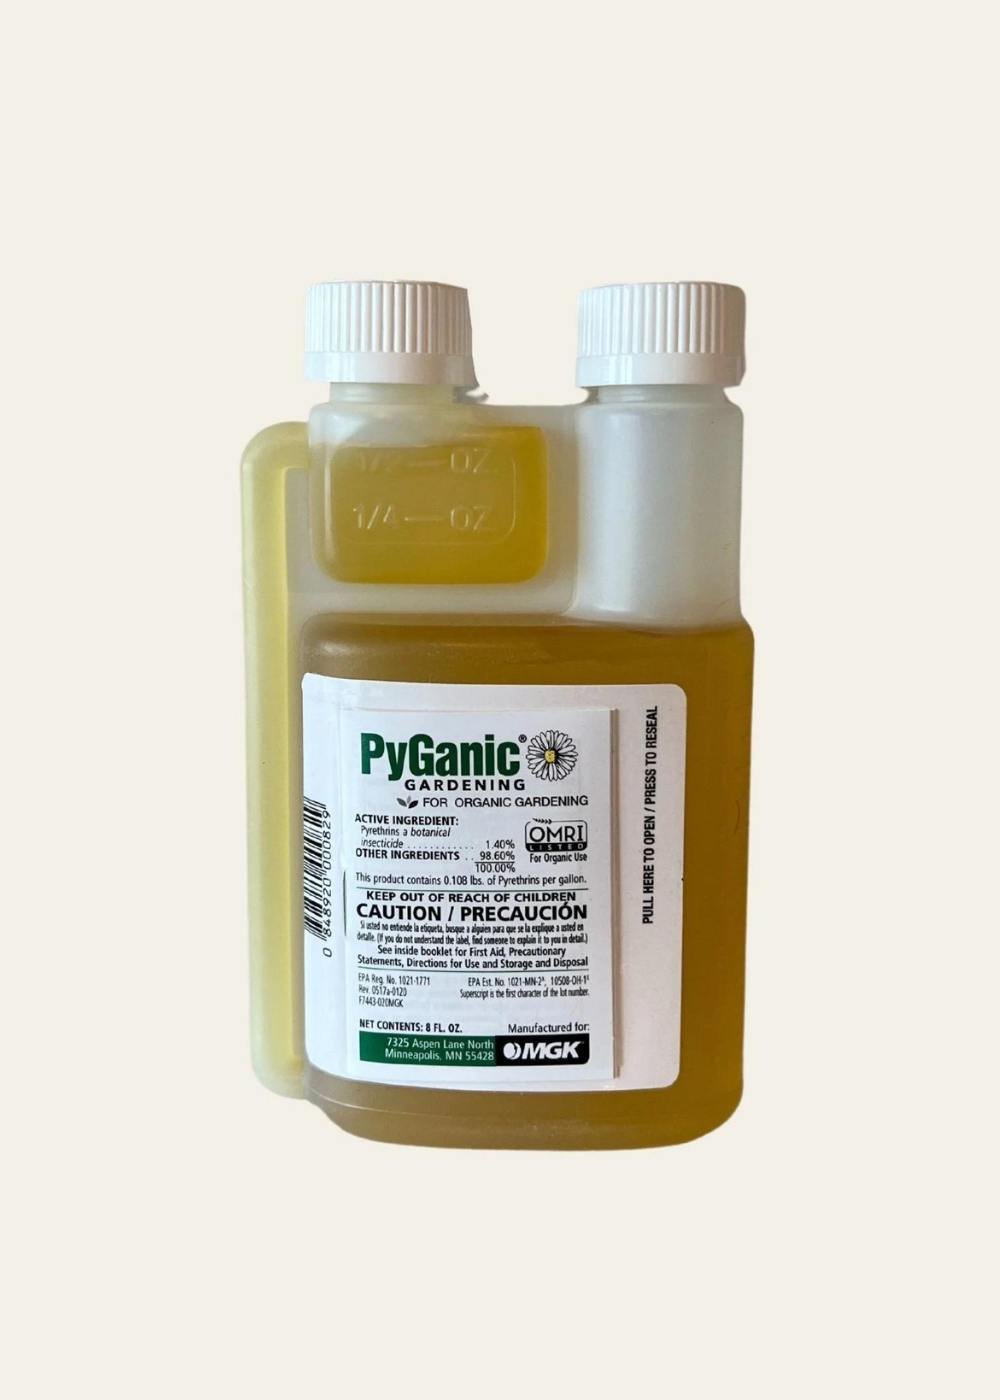 PyGanic Gardening 8oz Botanical Insecticide Pyrethrin Concentrate - Menagerie Farm & Flower